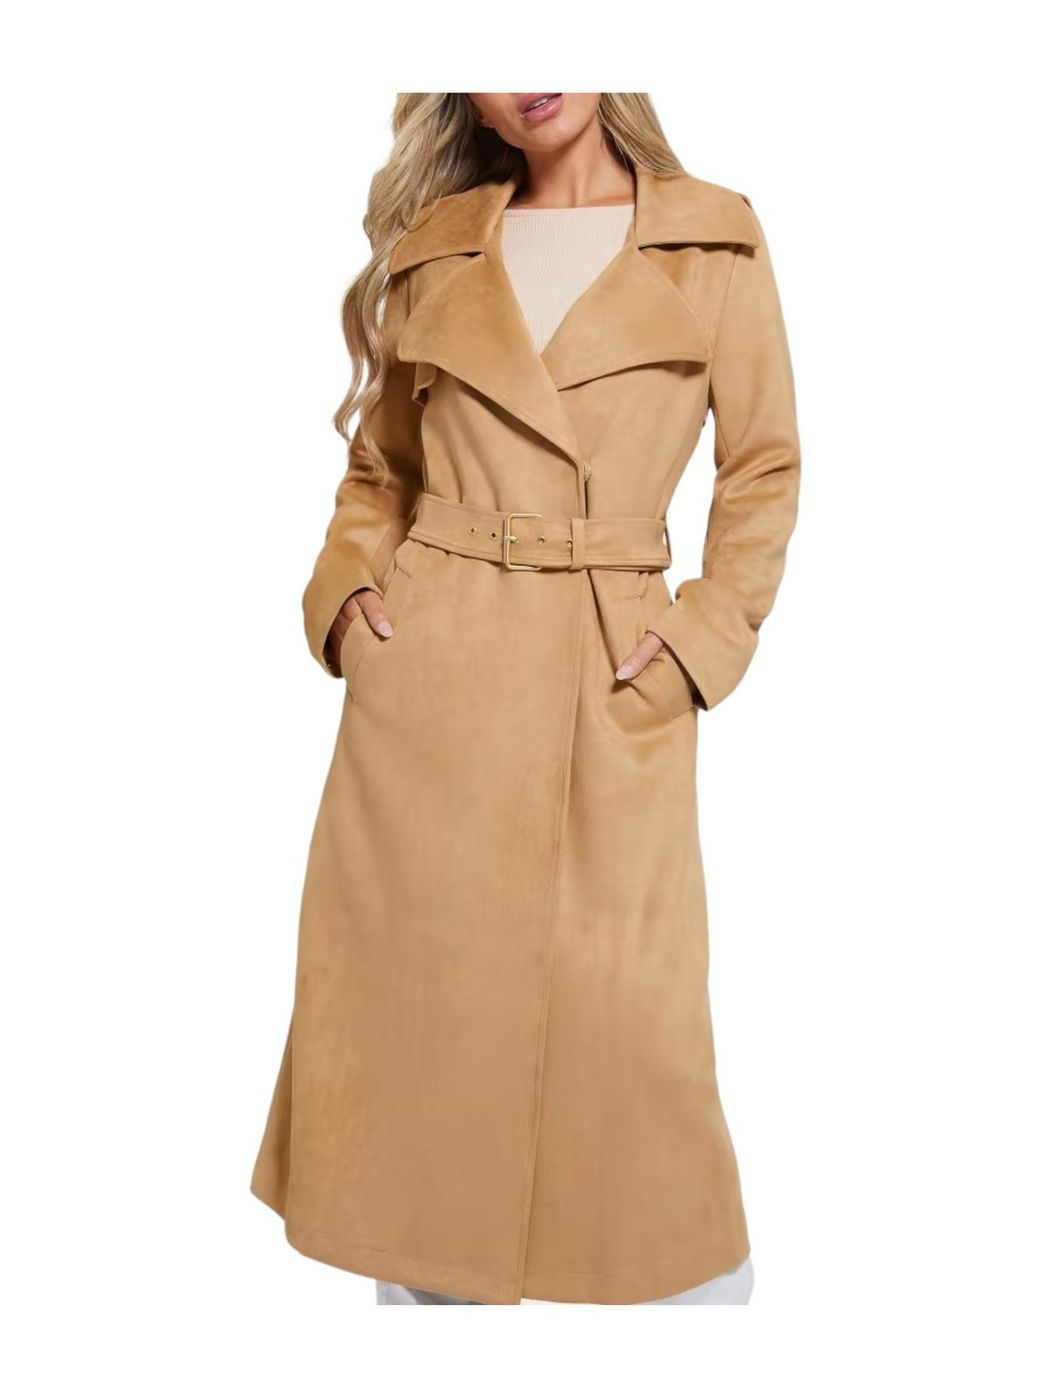 GUESS Cappotto Donna  W1BL35 WE4T0 G197 Beige